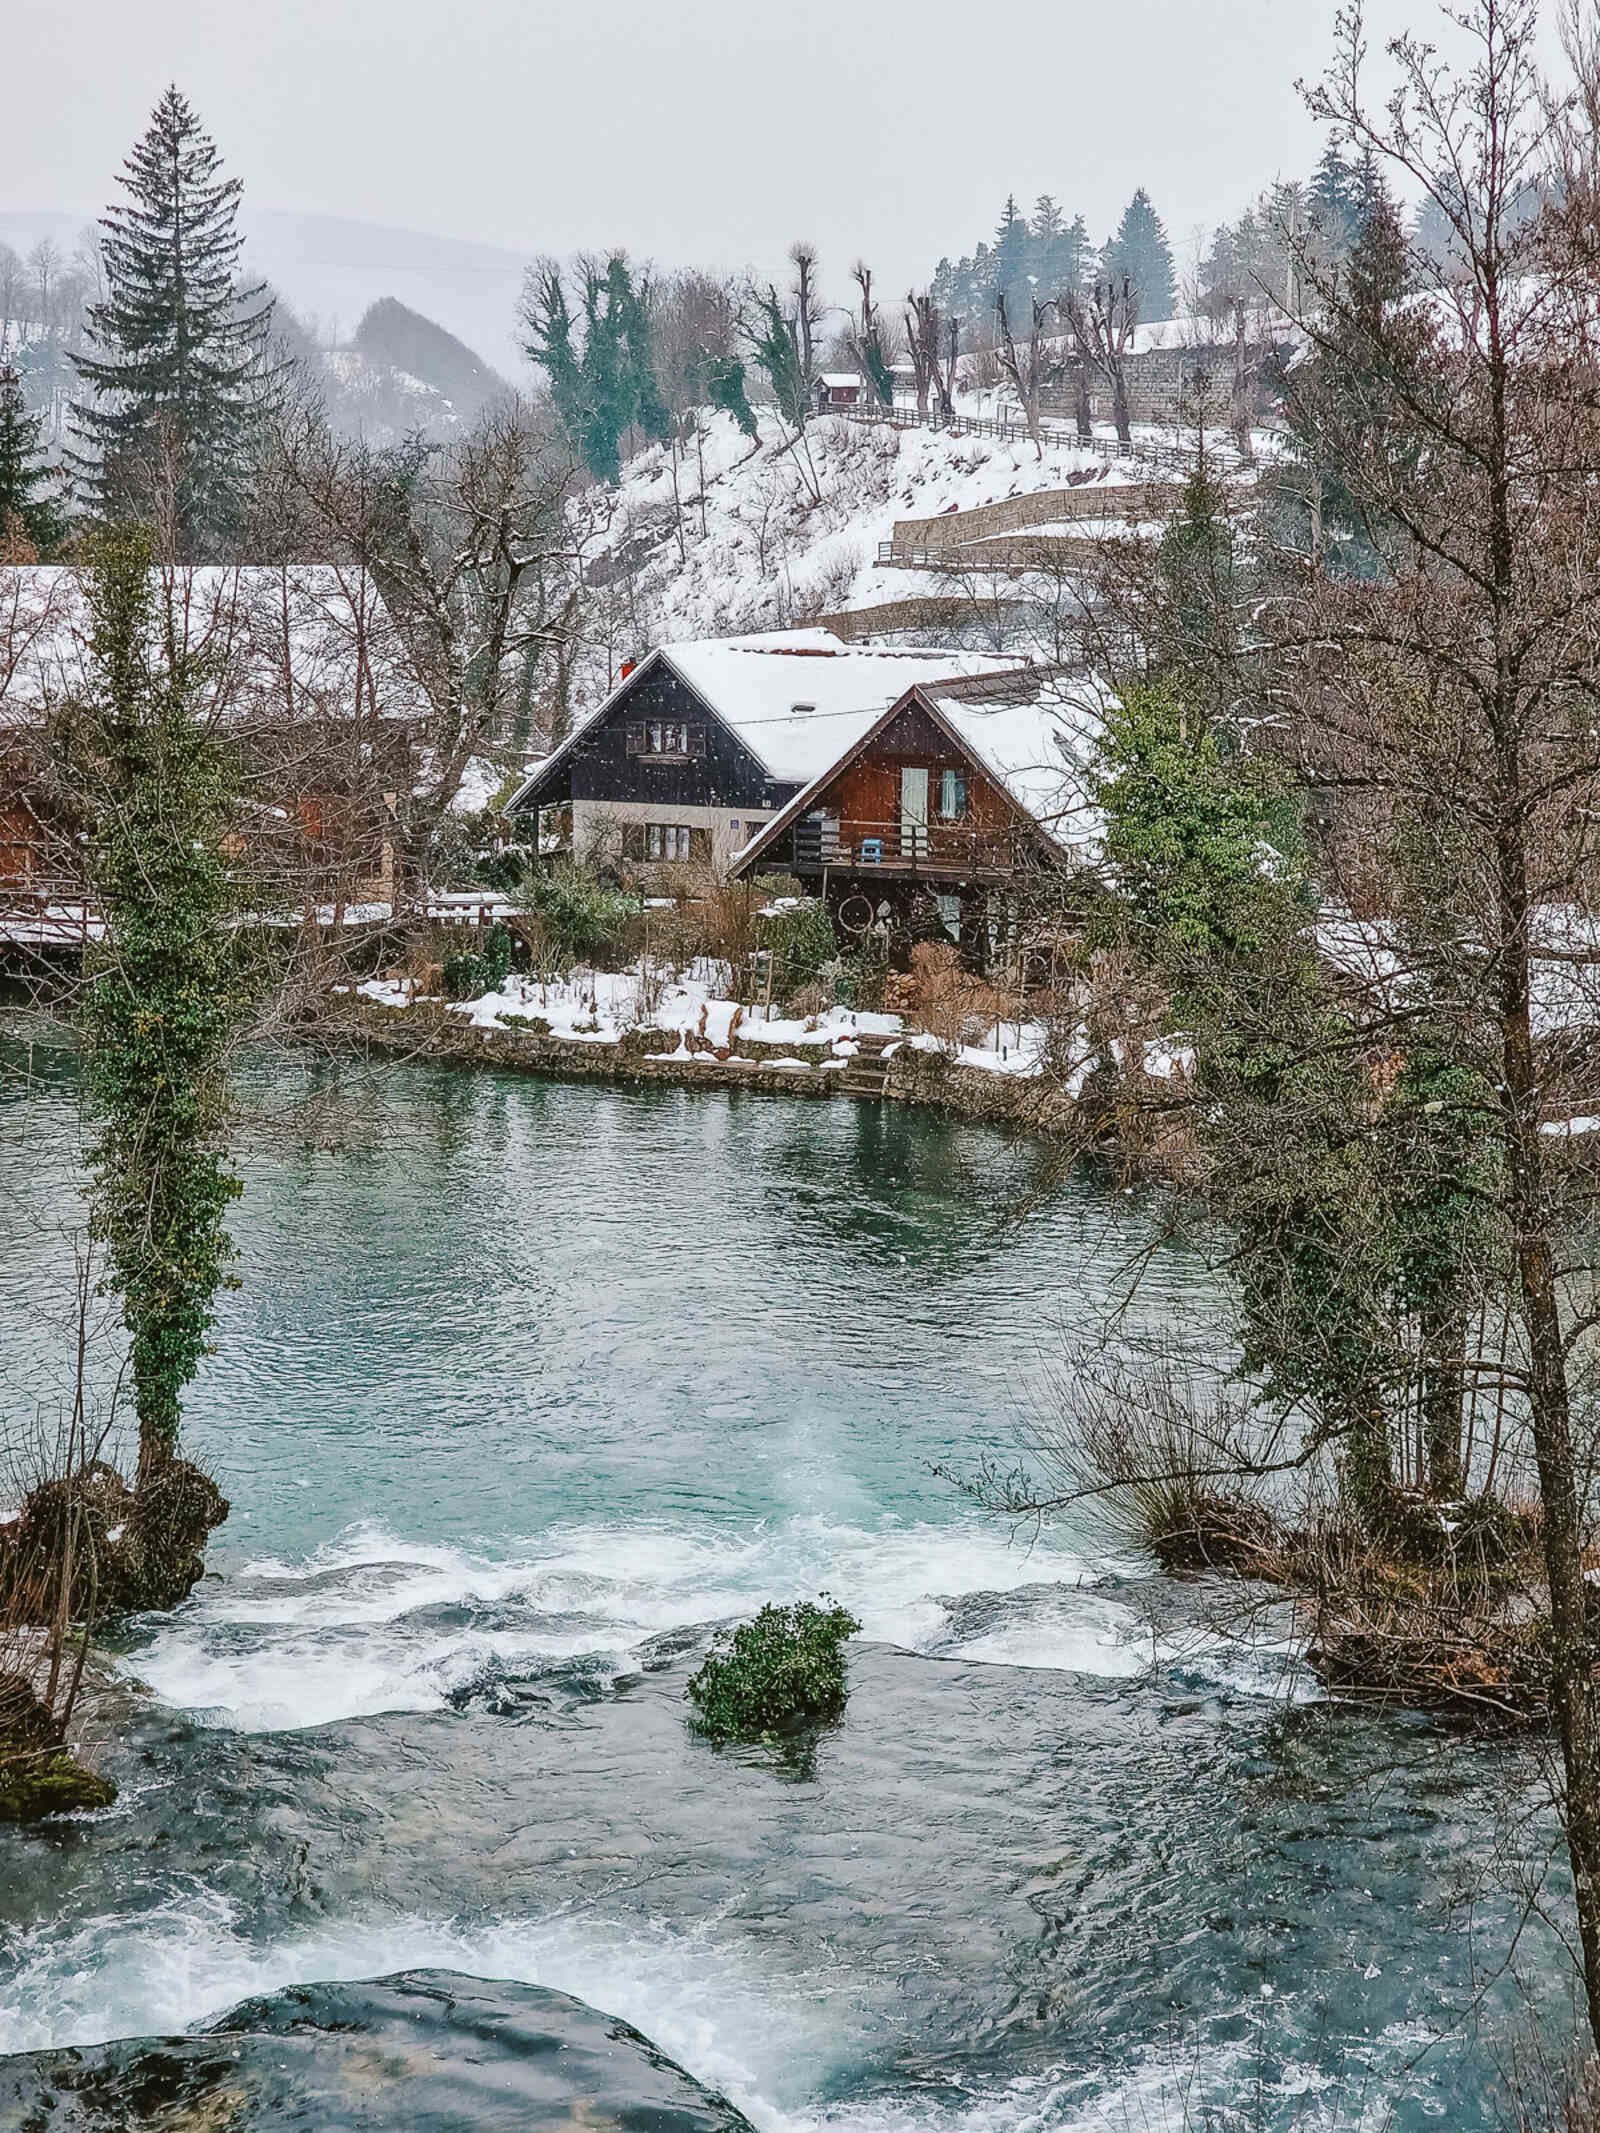 wooden a-frame cabins on the river banks in rastoke village, roofs are white with snow and snow is falling. Hills behind the houses are covered in snow too